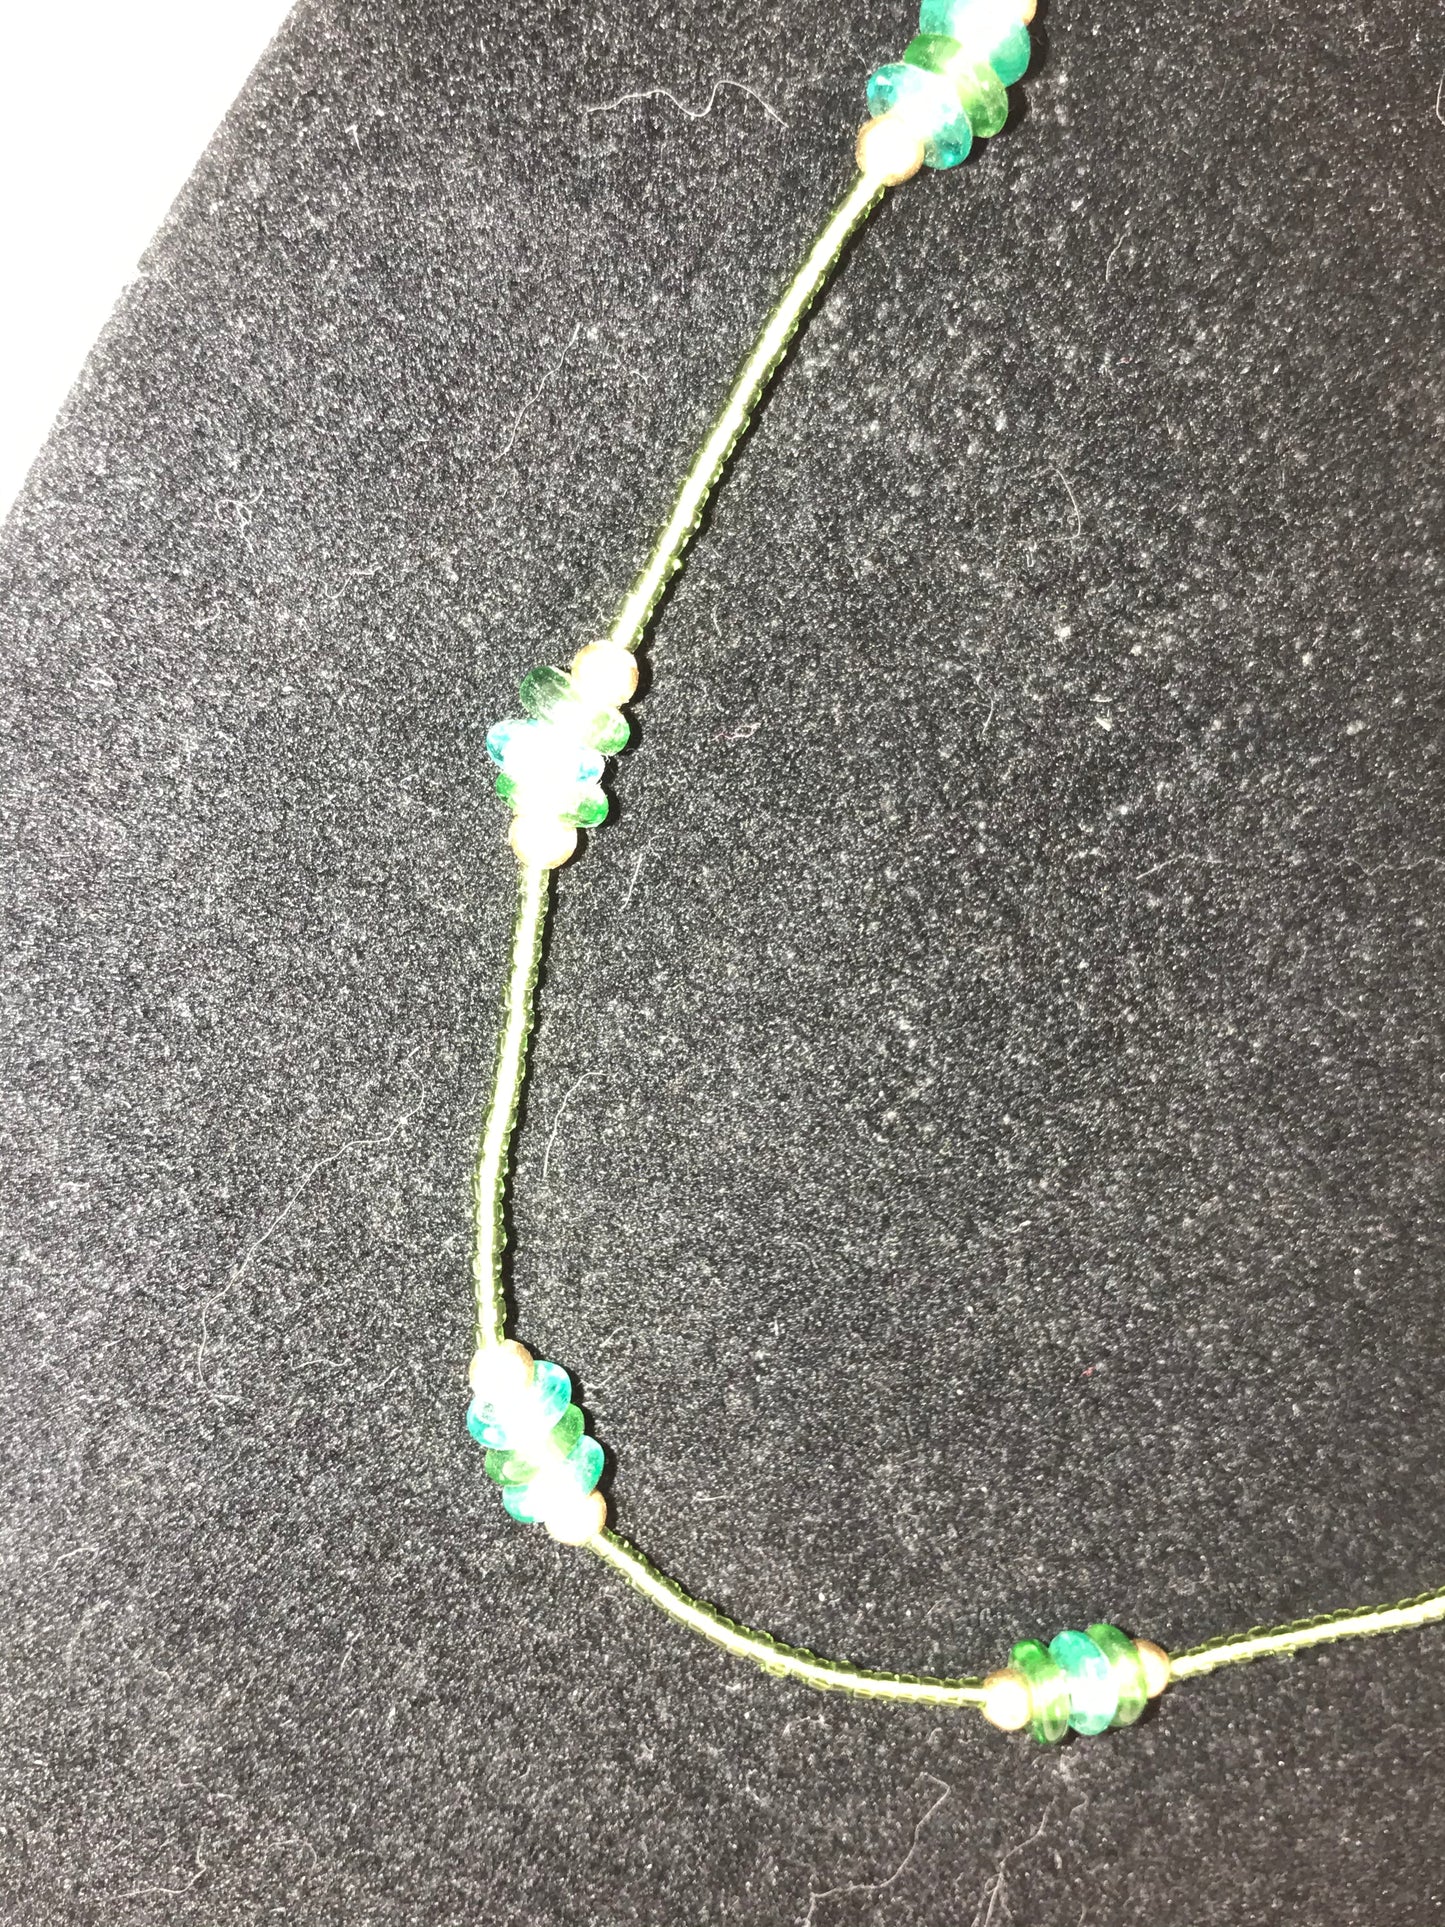 21 1/2" Green and Gold Seed Bead Necklace